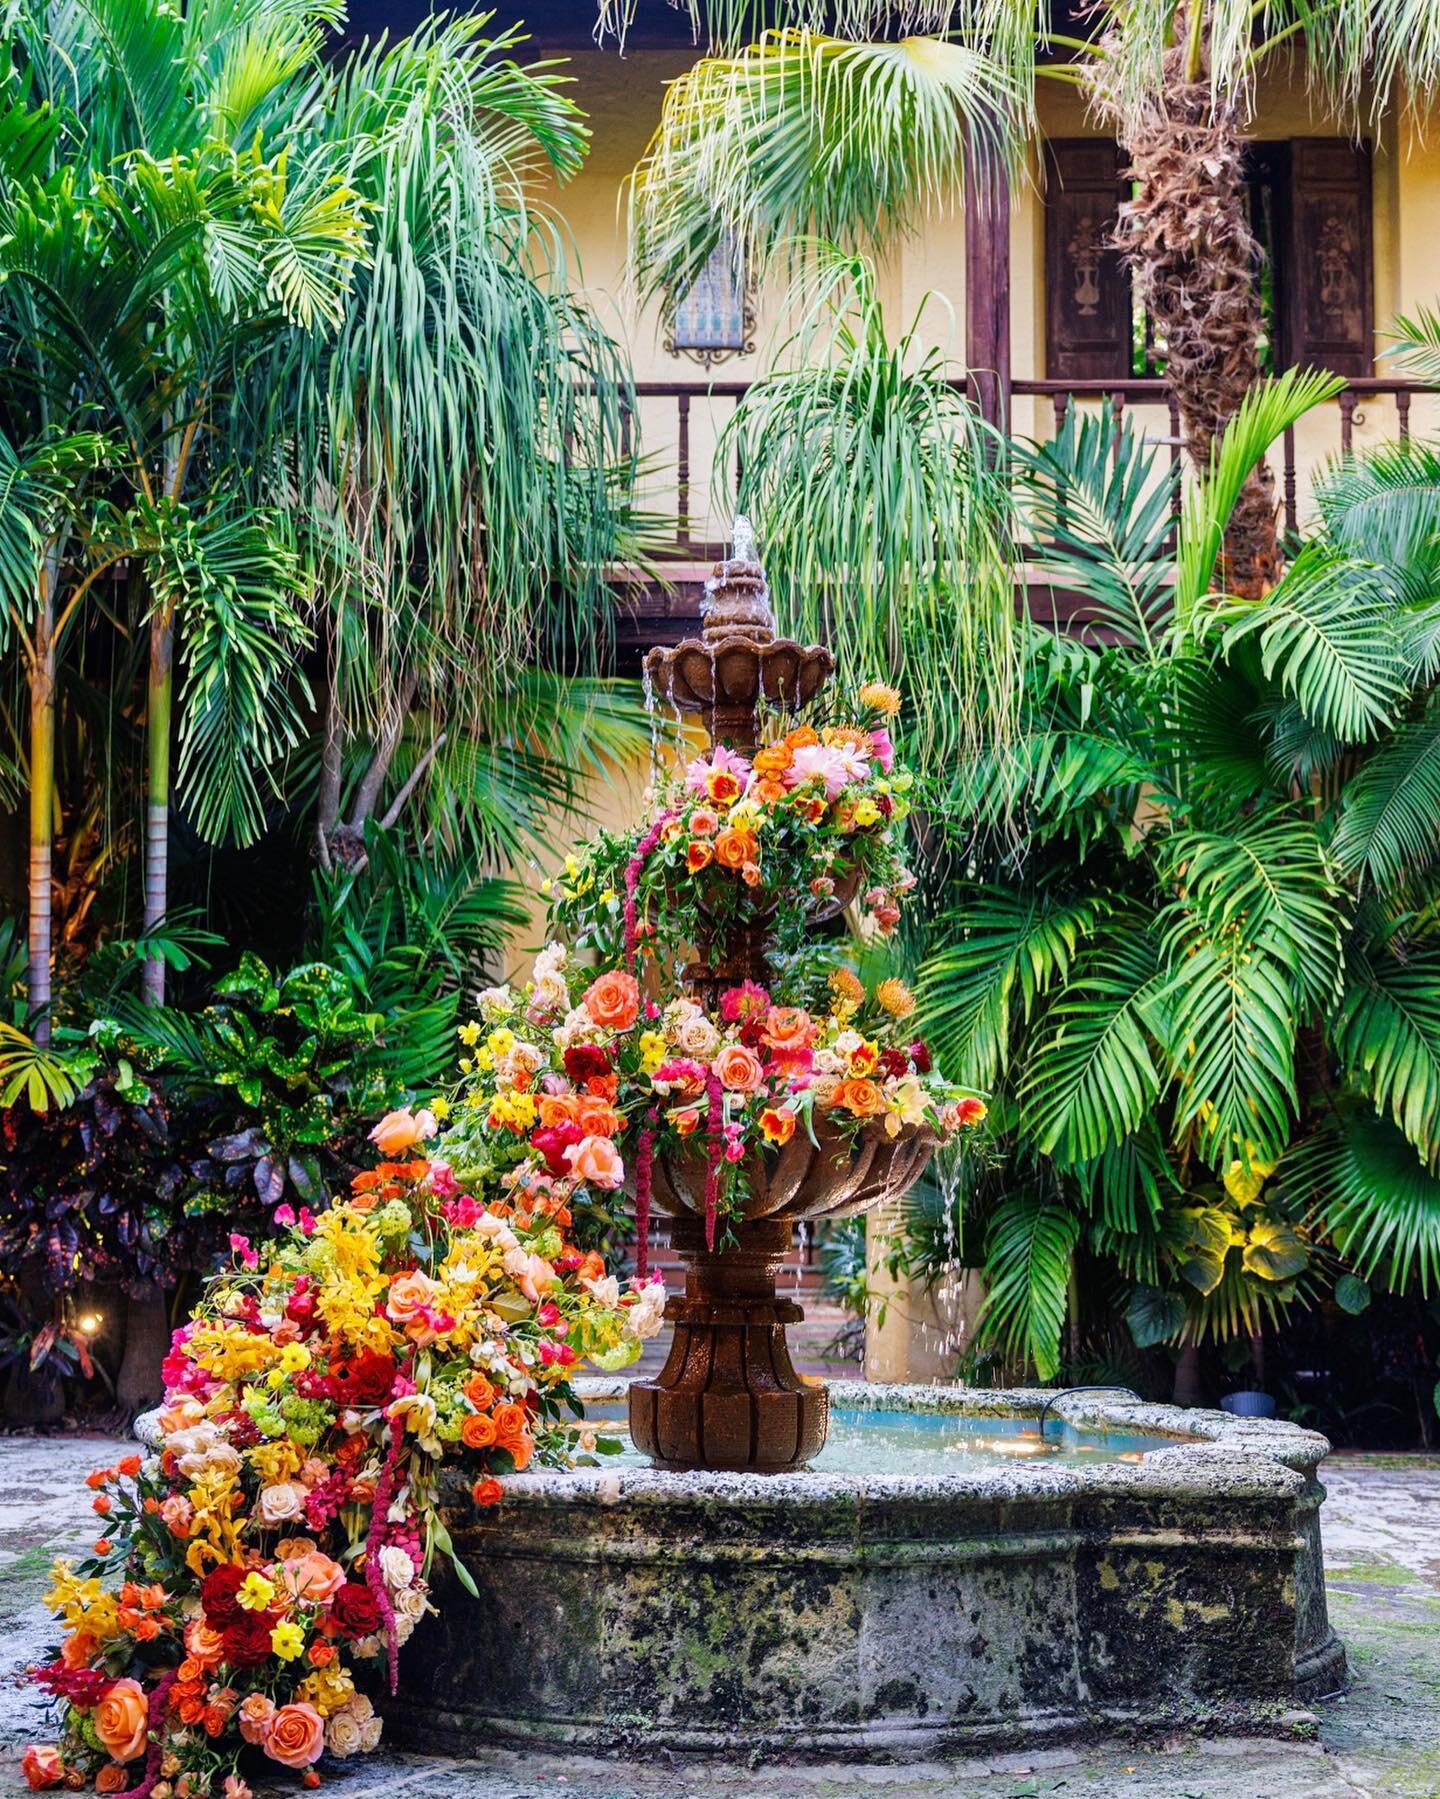 Flowering fountains and fedoras for an epic backyard birthday celebration! 🌿

Production &amp; Design: @rennyandreed 
Lighting: @frostfl_events 
Catering: @ikcateringpalmbeach
Photography: @goksun_photography